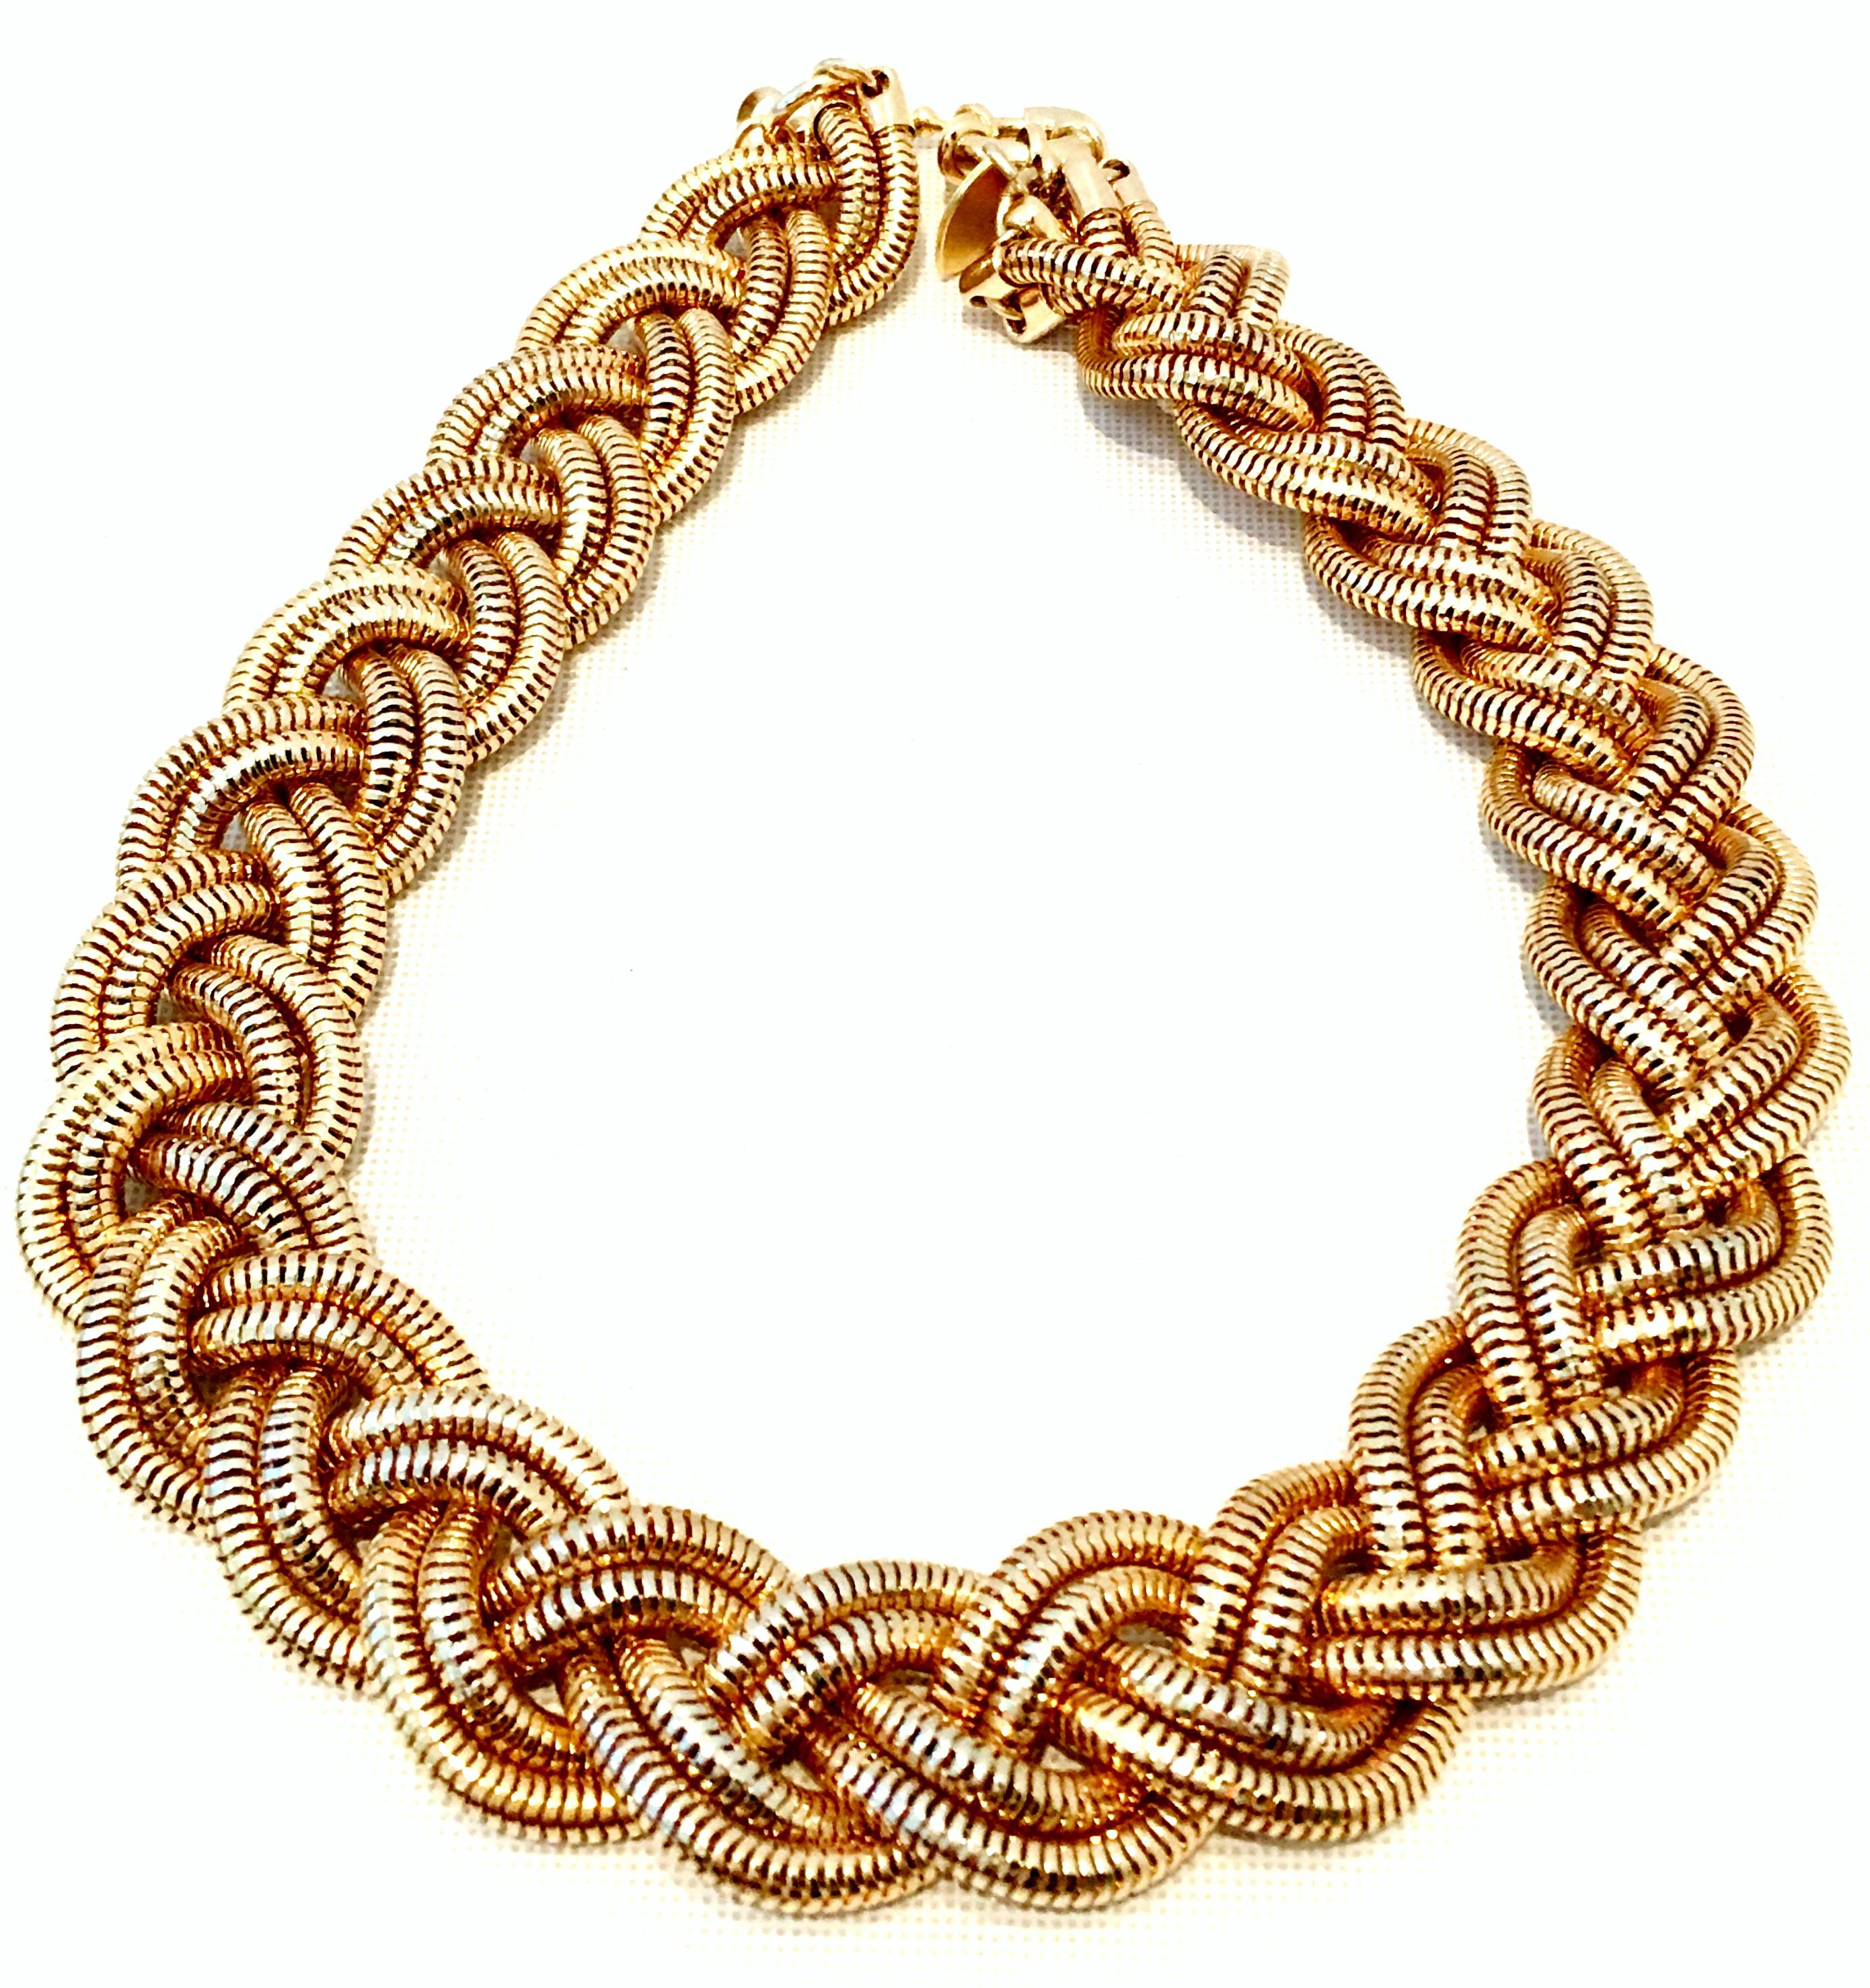 21st Century 14K Gold Plate Mesh & Twisted Rope Choker Style Necklace By, Giles & Brothers. This substantial and chunky piece features six rows of gold plate mesh and twisted rope detail. Signed with the iconic Giles & Bro gold hang tag at the clasp.